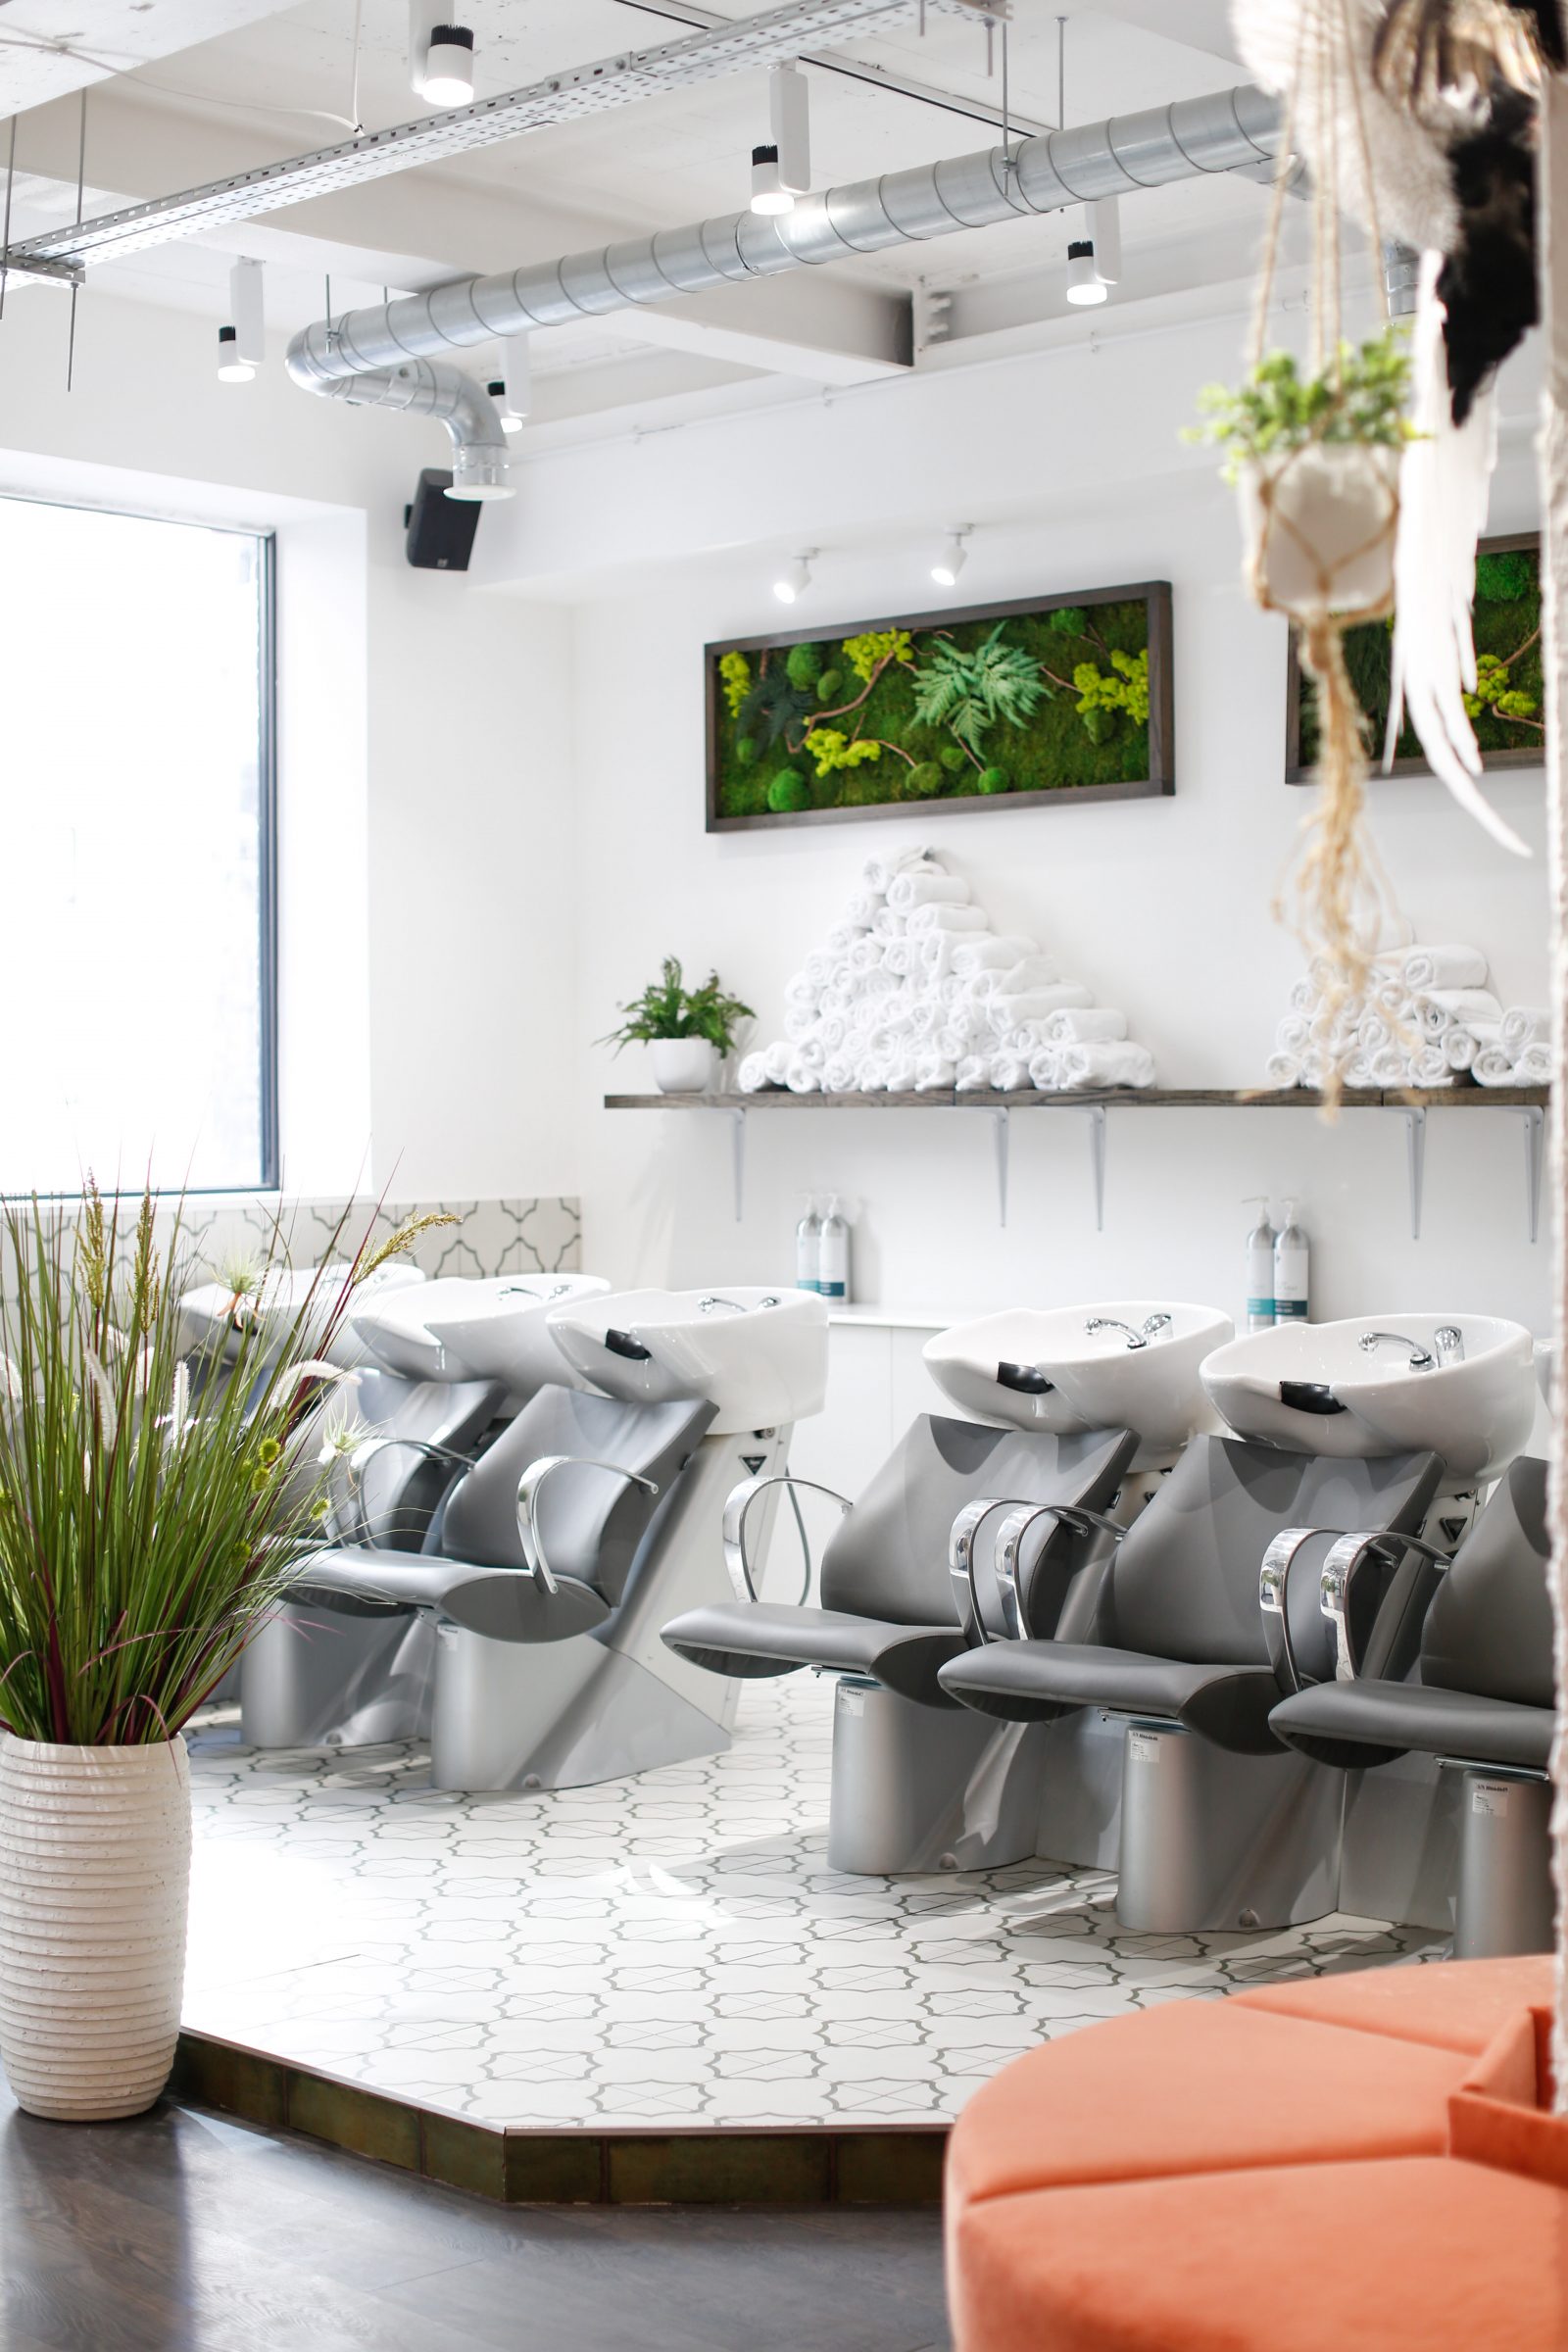 London City Guide Most Instagrammable Blow Dry Bar Fashion Mumblr